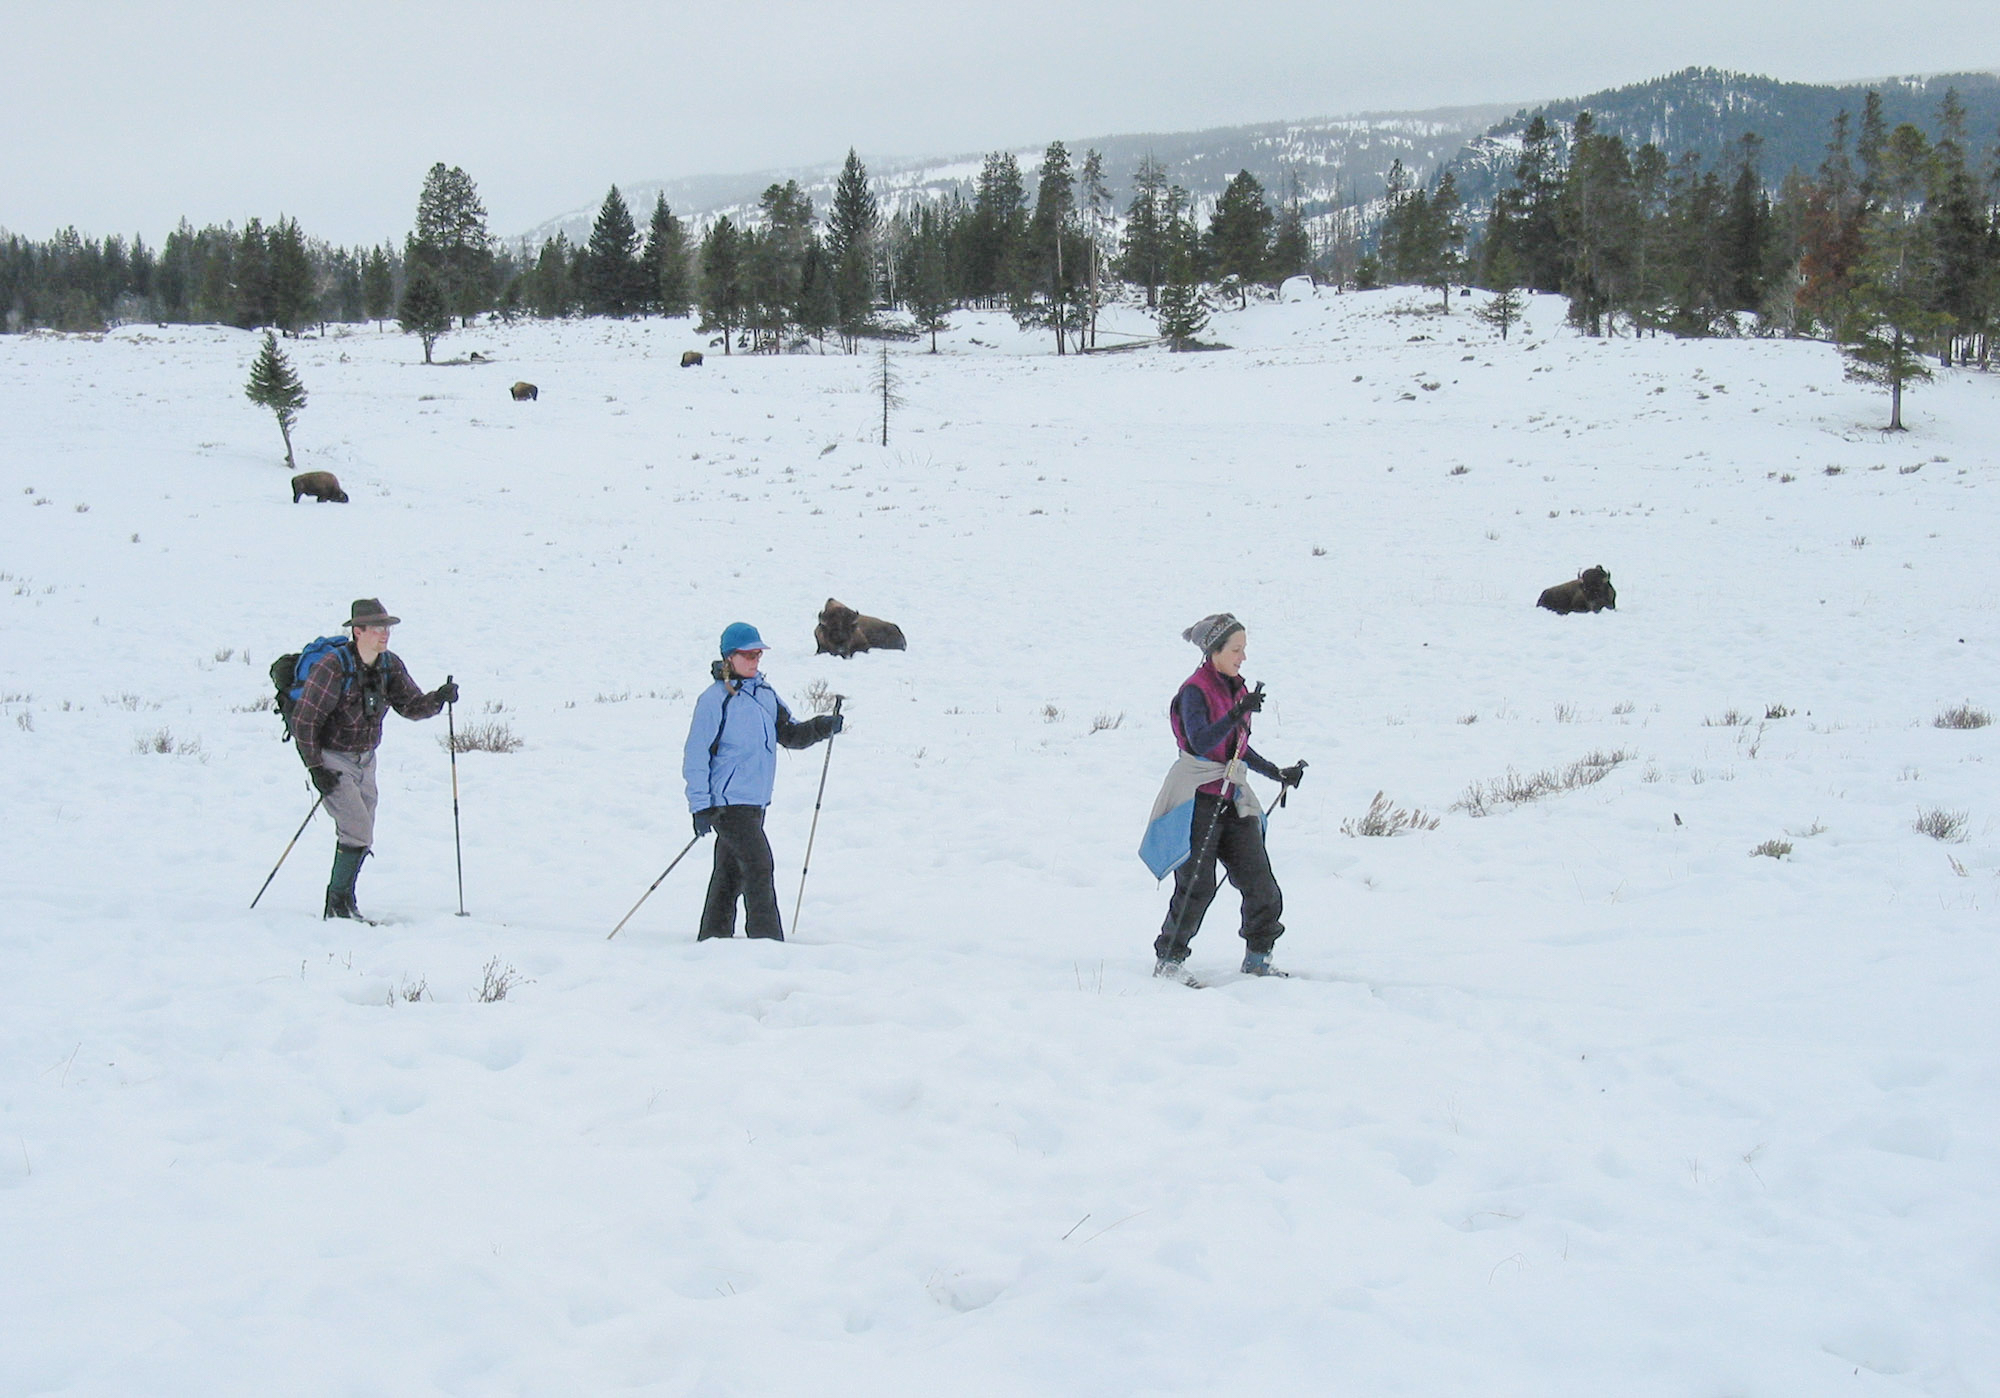 Three skiers skiing across an open meadow with four bison in the background